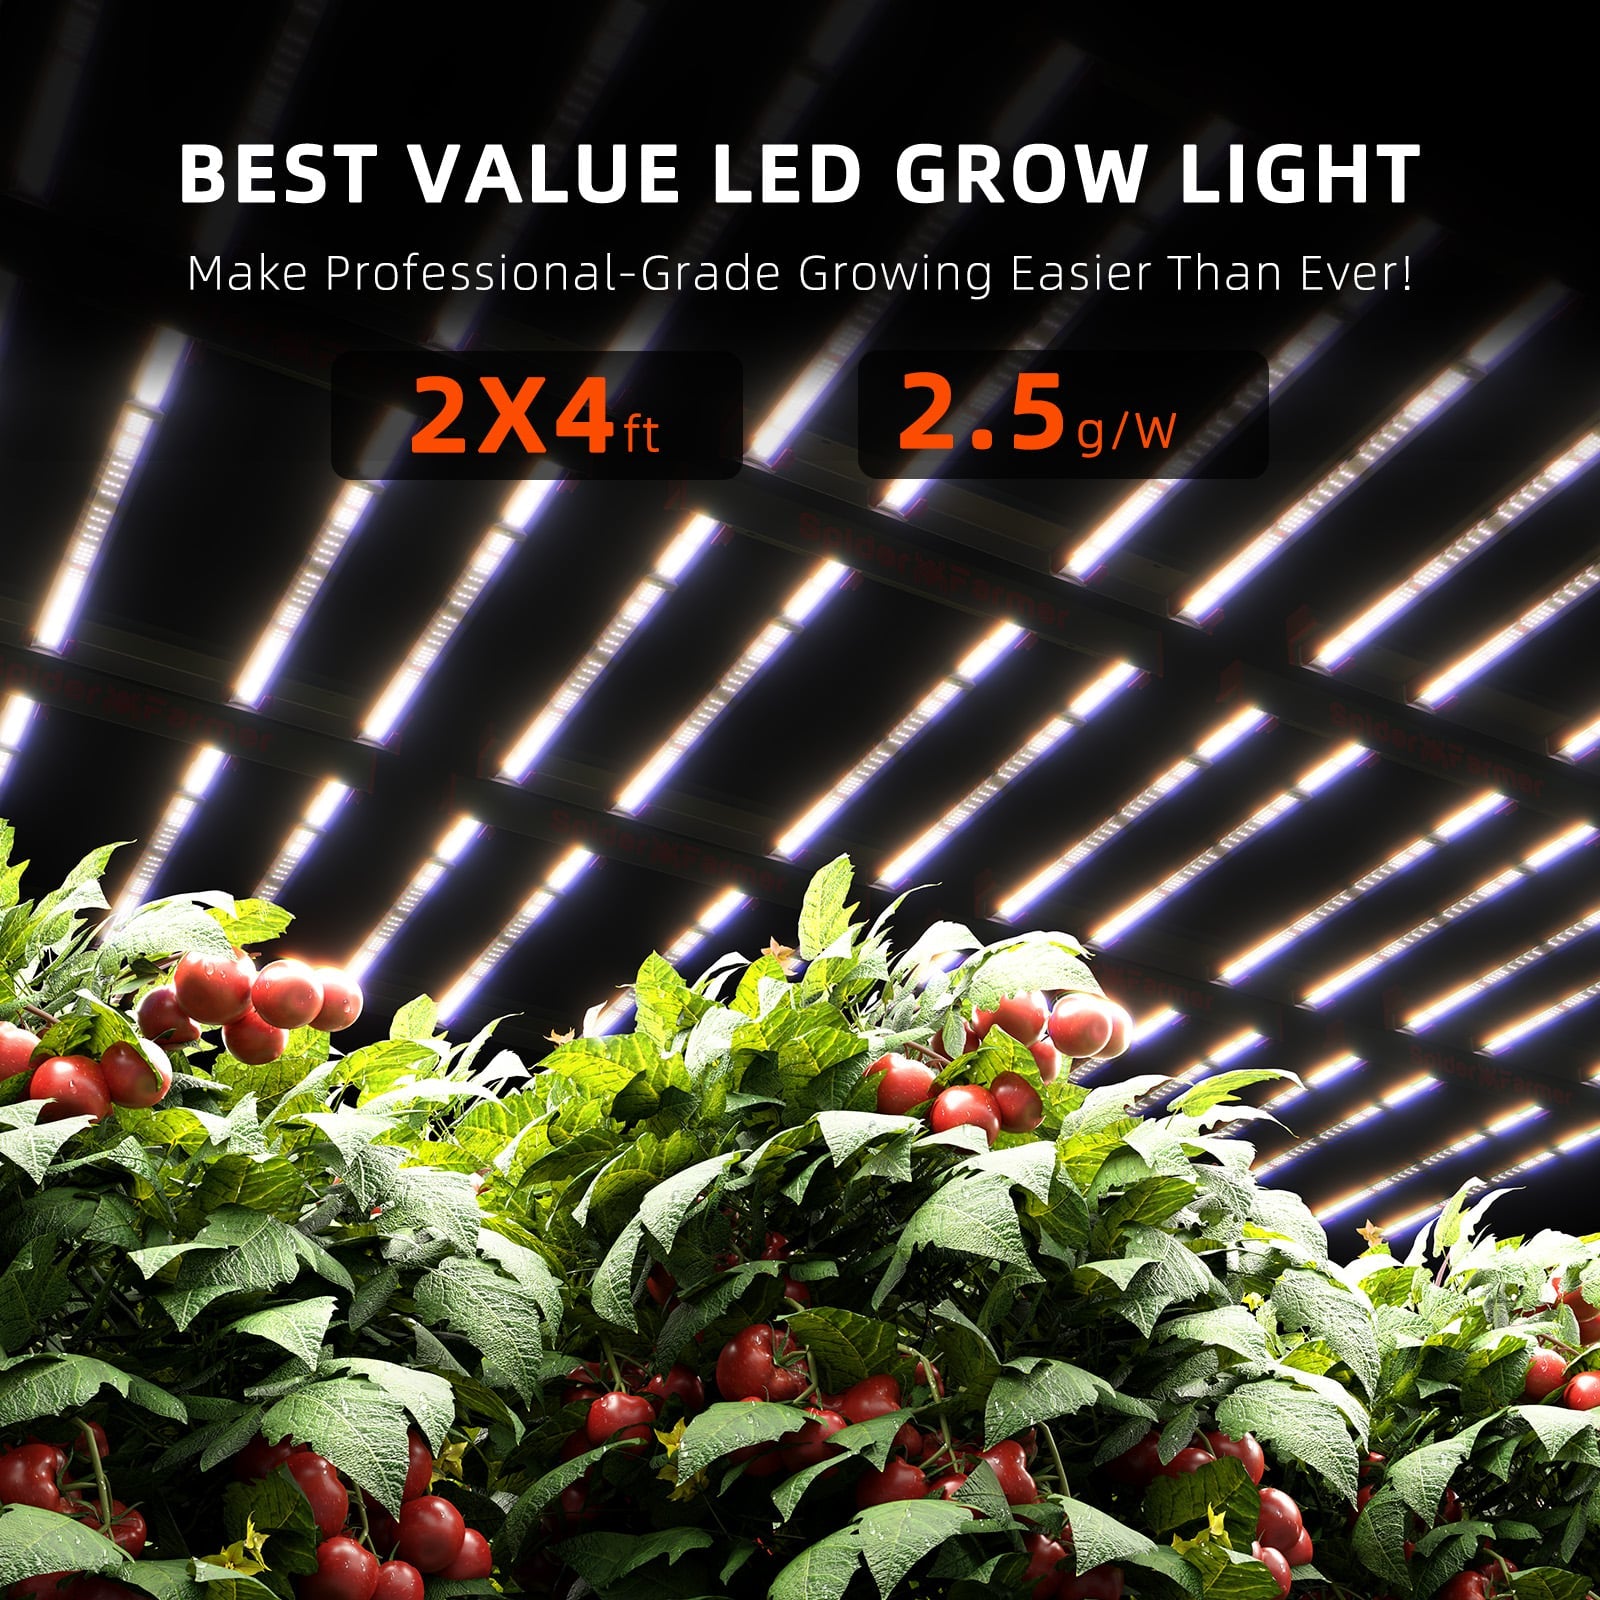 Product Secondary Image:Spider Farmer® G4500 430W Cost-effective Full Spectrum LED Grow Light